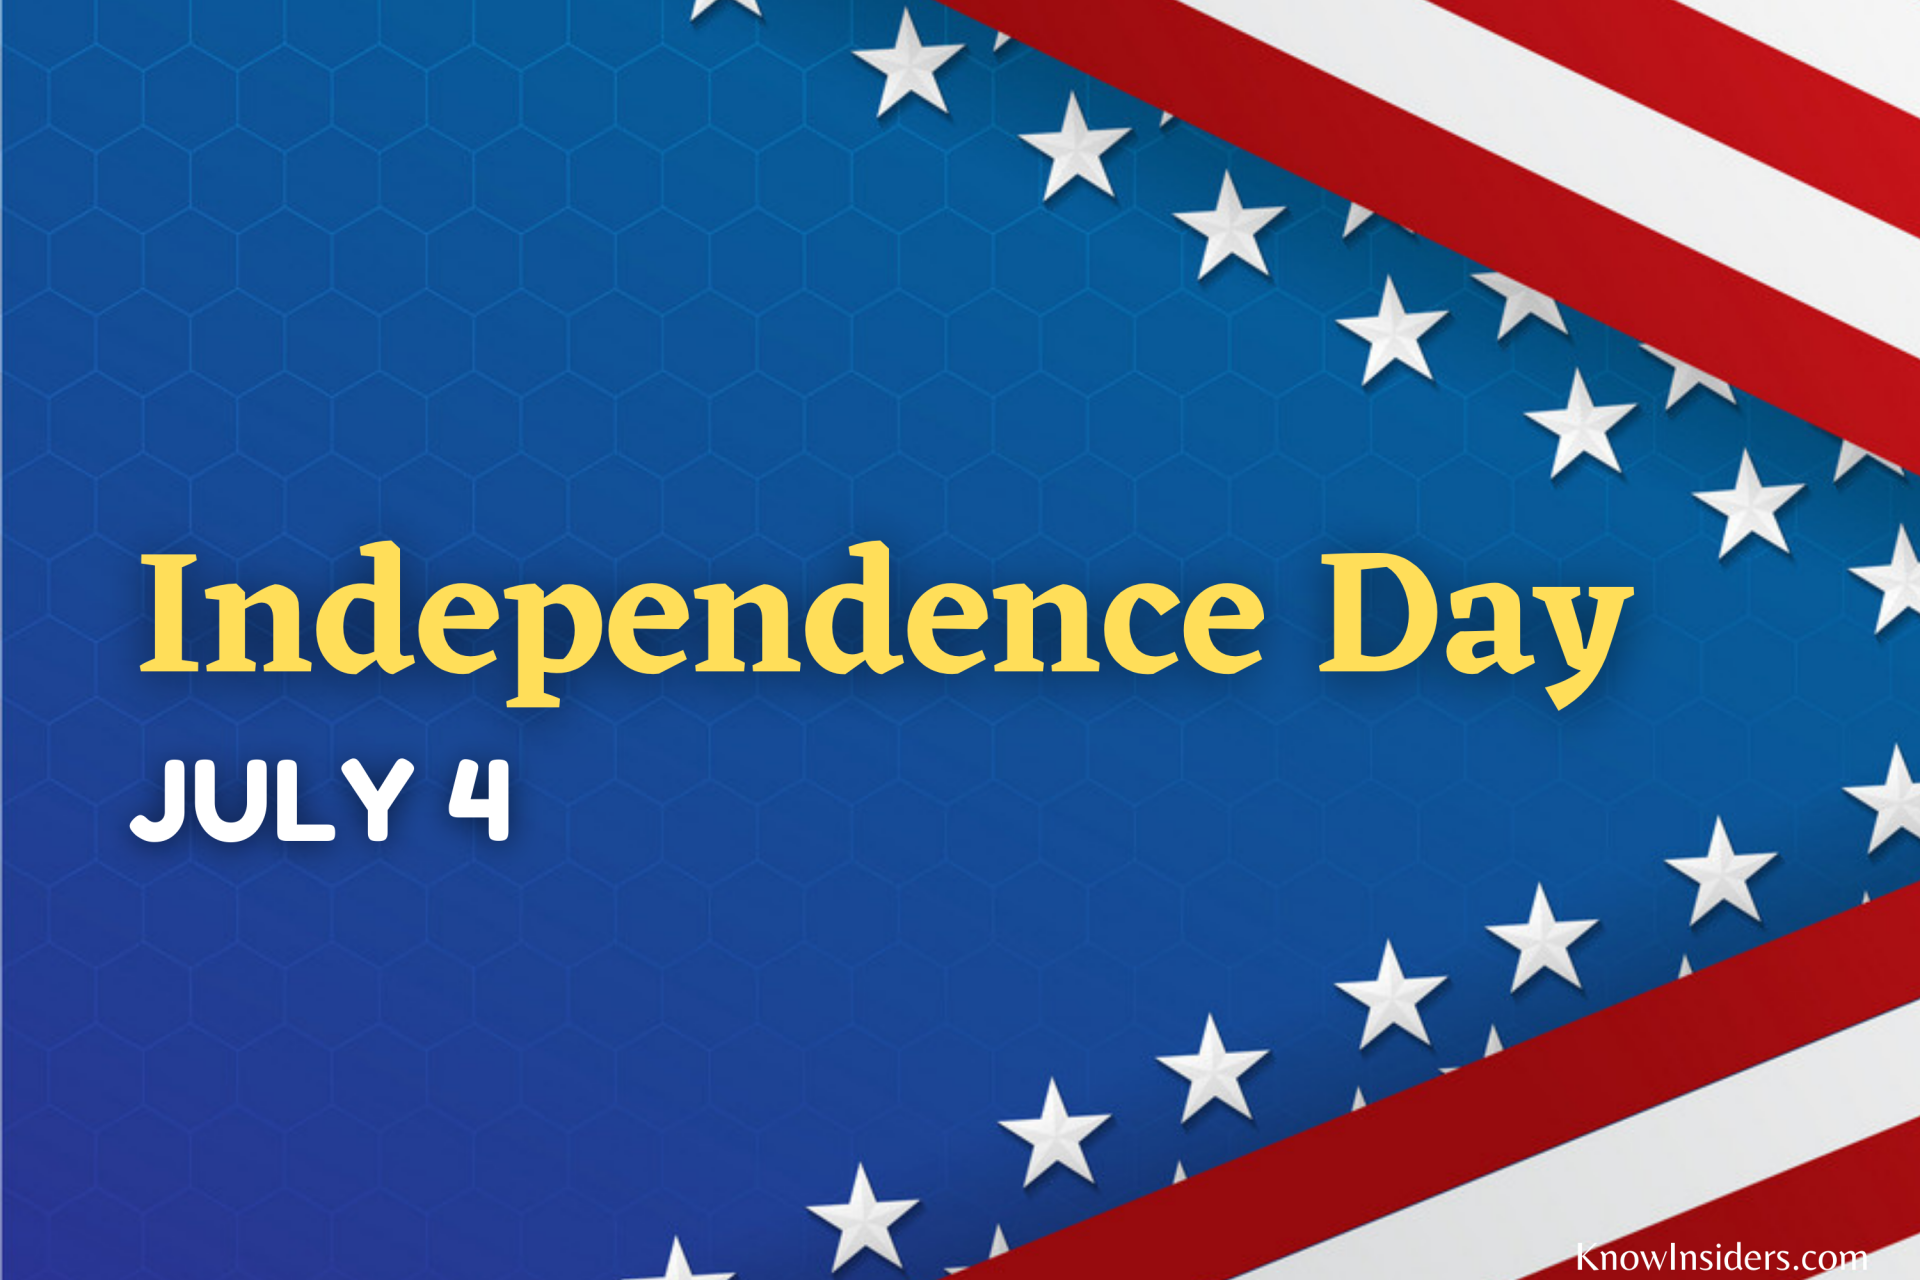 USA Independence Day (July 4): Timeline, Q & A and Facts